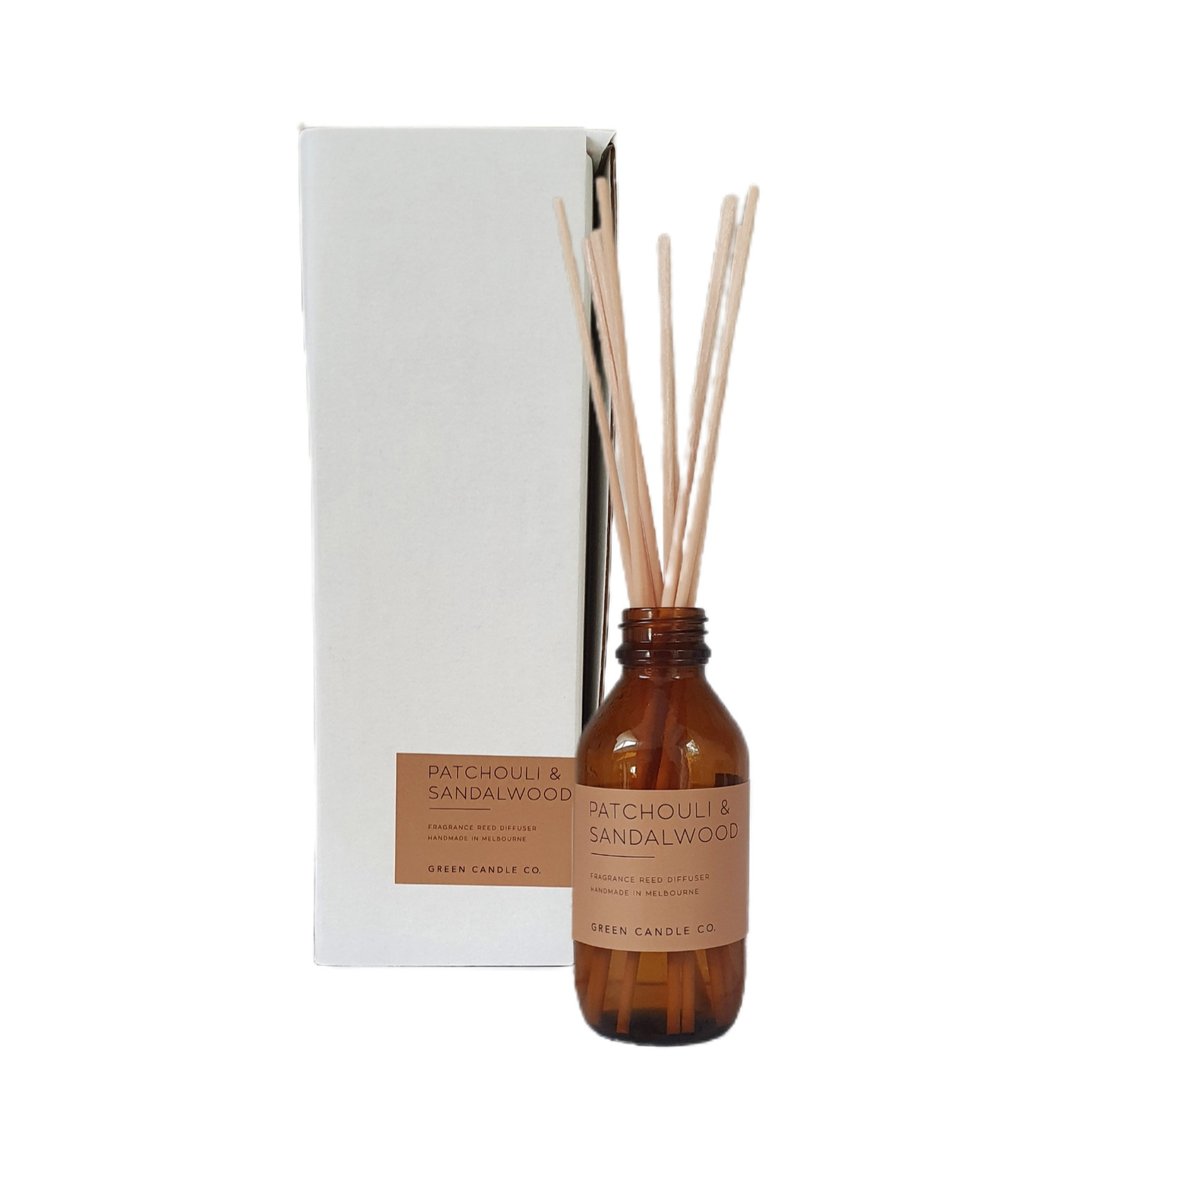 Image of PATCHOULI & SANDALWOOD / Reed Diffuser 